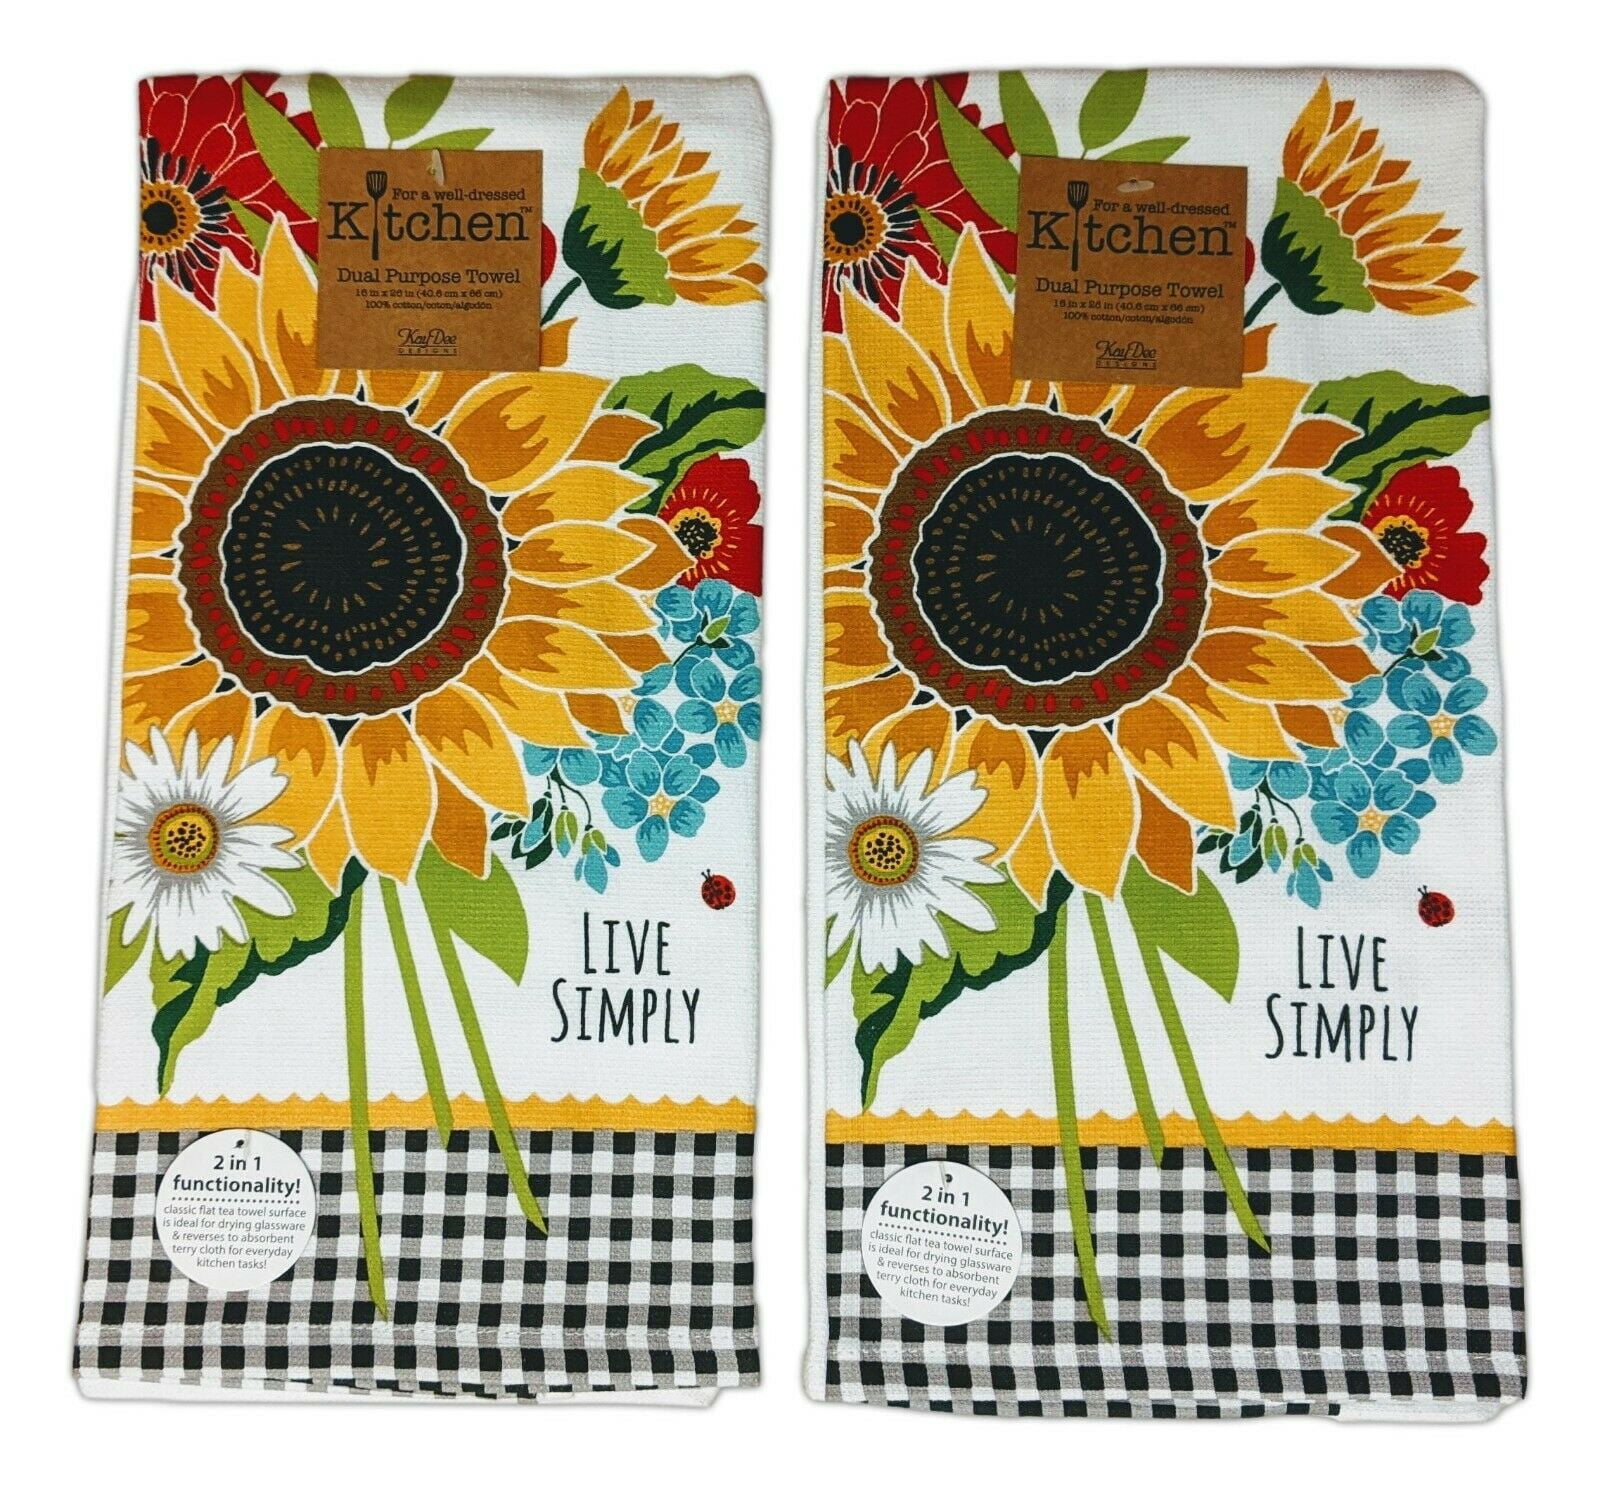  SOHO Living Simple Terry Kitchen Towels (Set of 2) (Simple  Stitch Denim) : Home & Kitchen